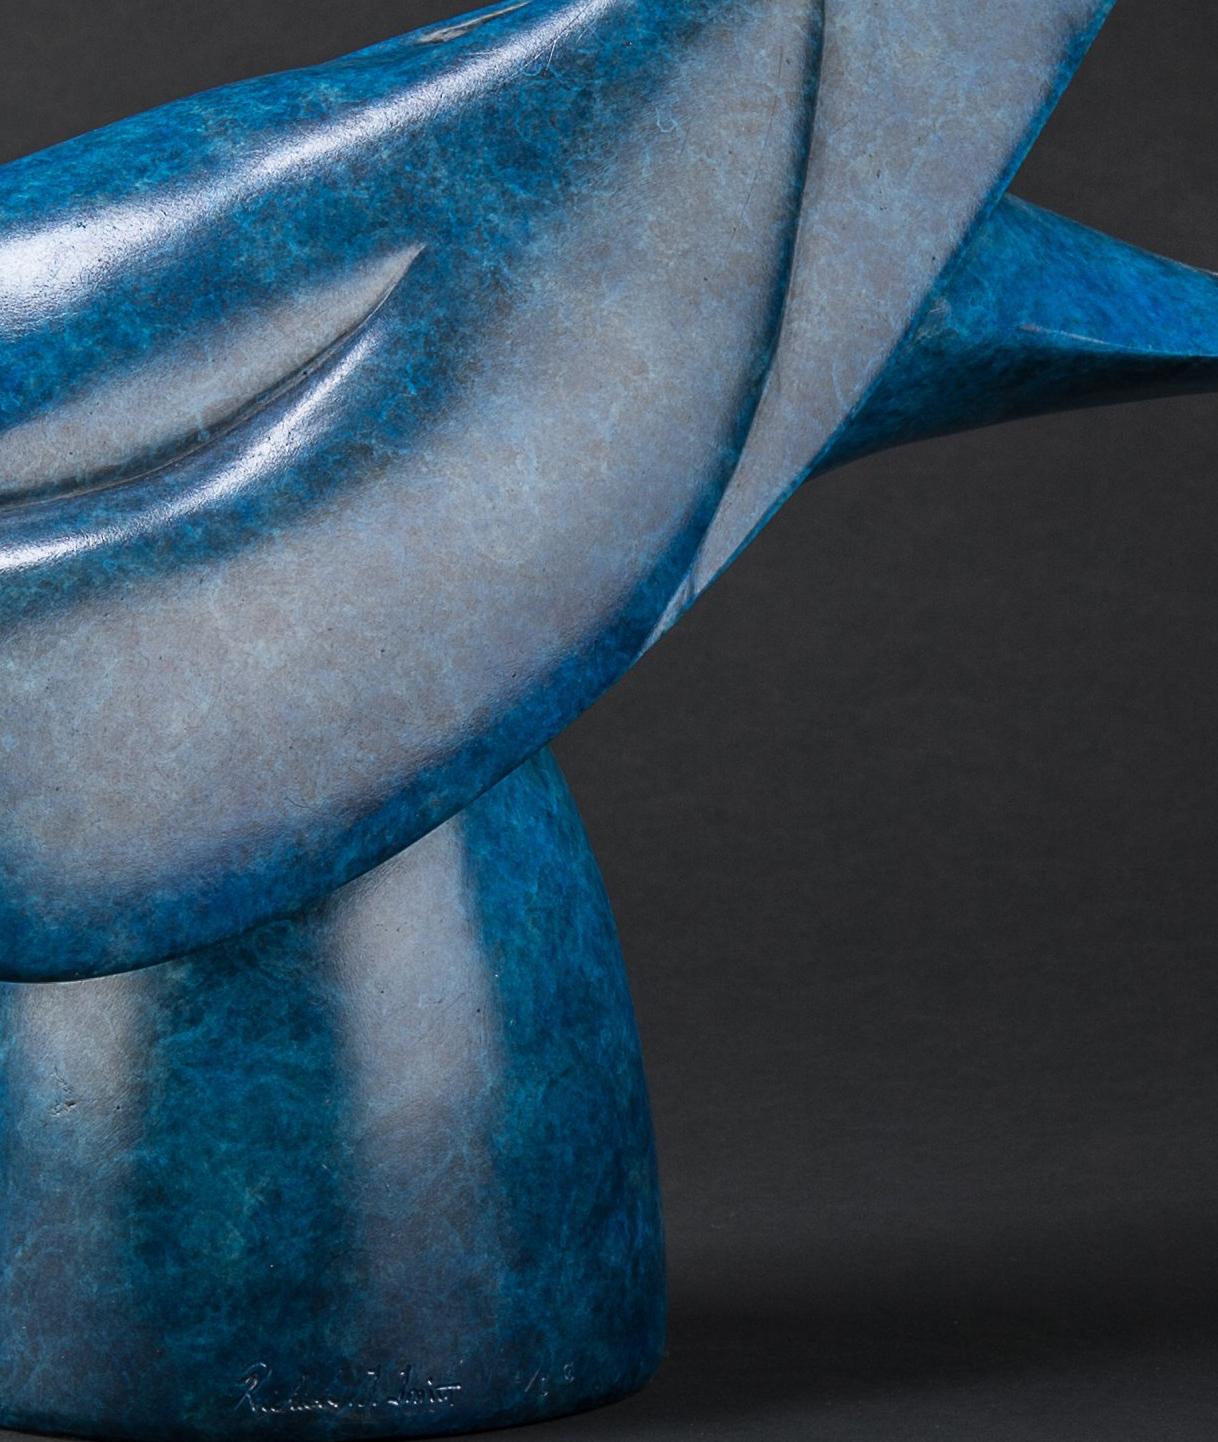 'Macaw' Solid Bronze Exotic Bird sculpture in Vibrant Electric Blue Patina - Contemporary Art by Richard Smith b.1955